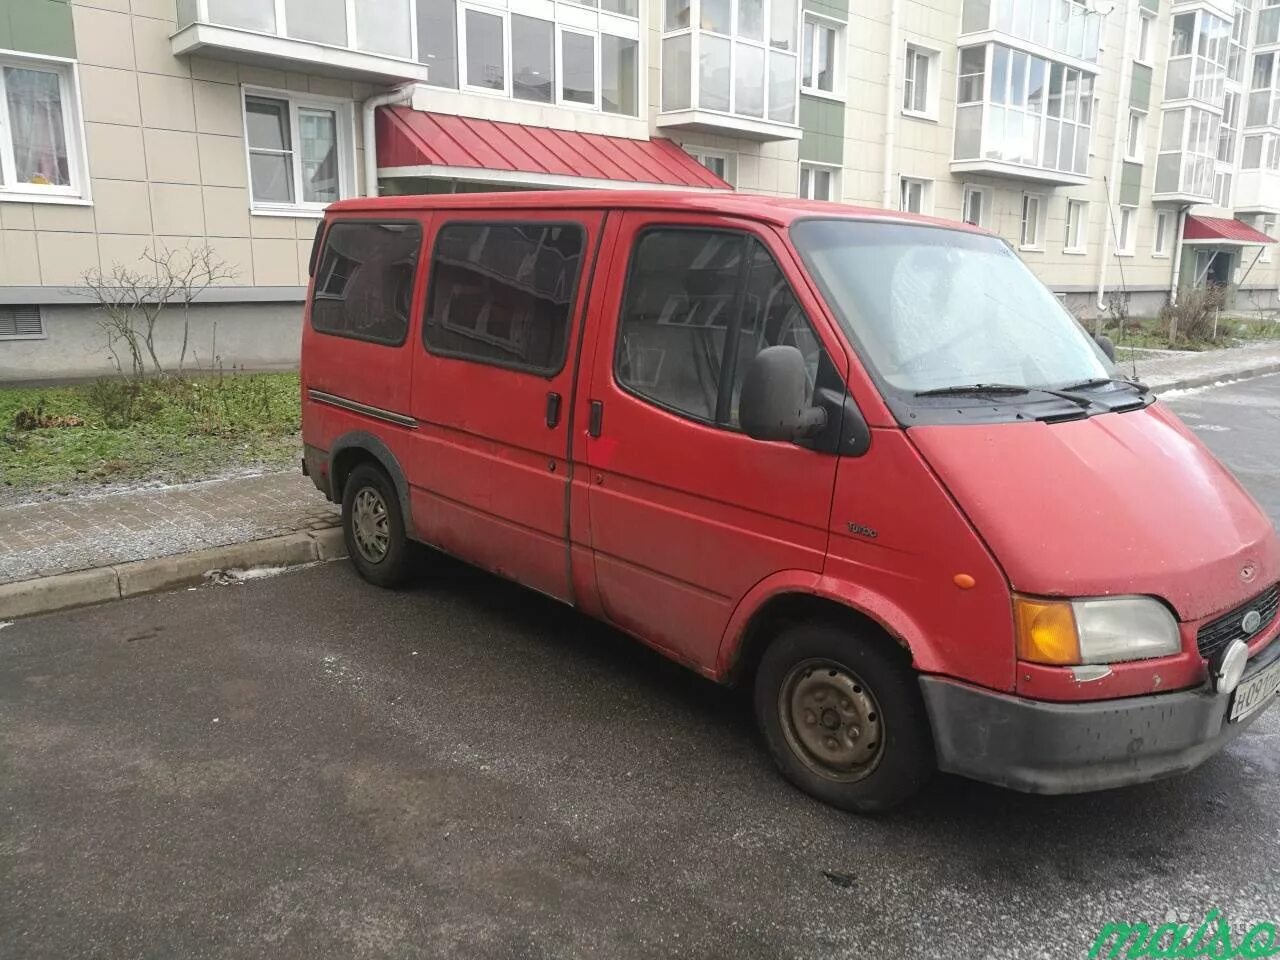 Ford Transit 1995. Форд Транзит 1995г. Ford Transit 1995 2000. Форд Транзит 1995 год коротыш.